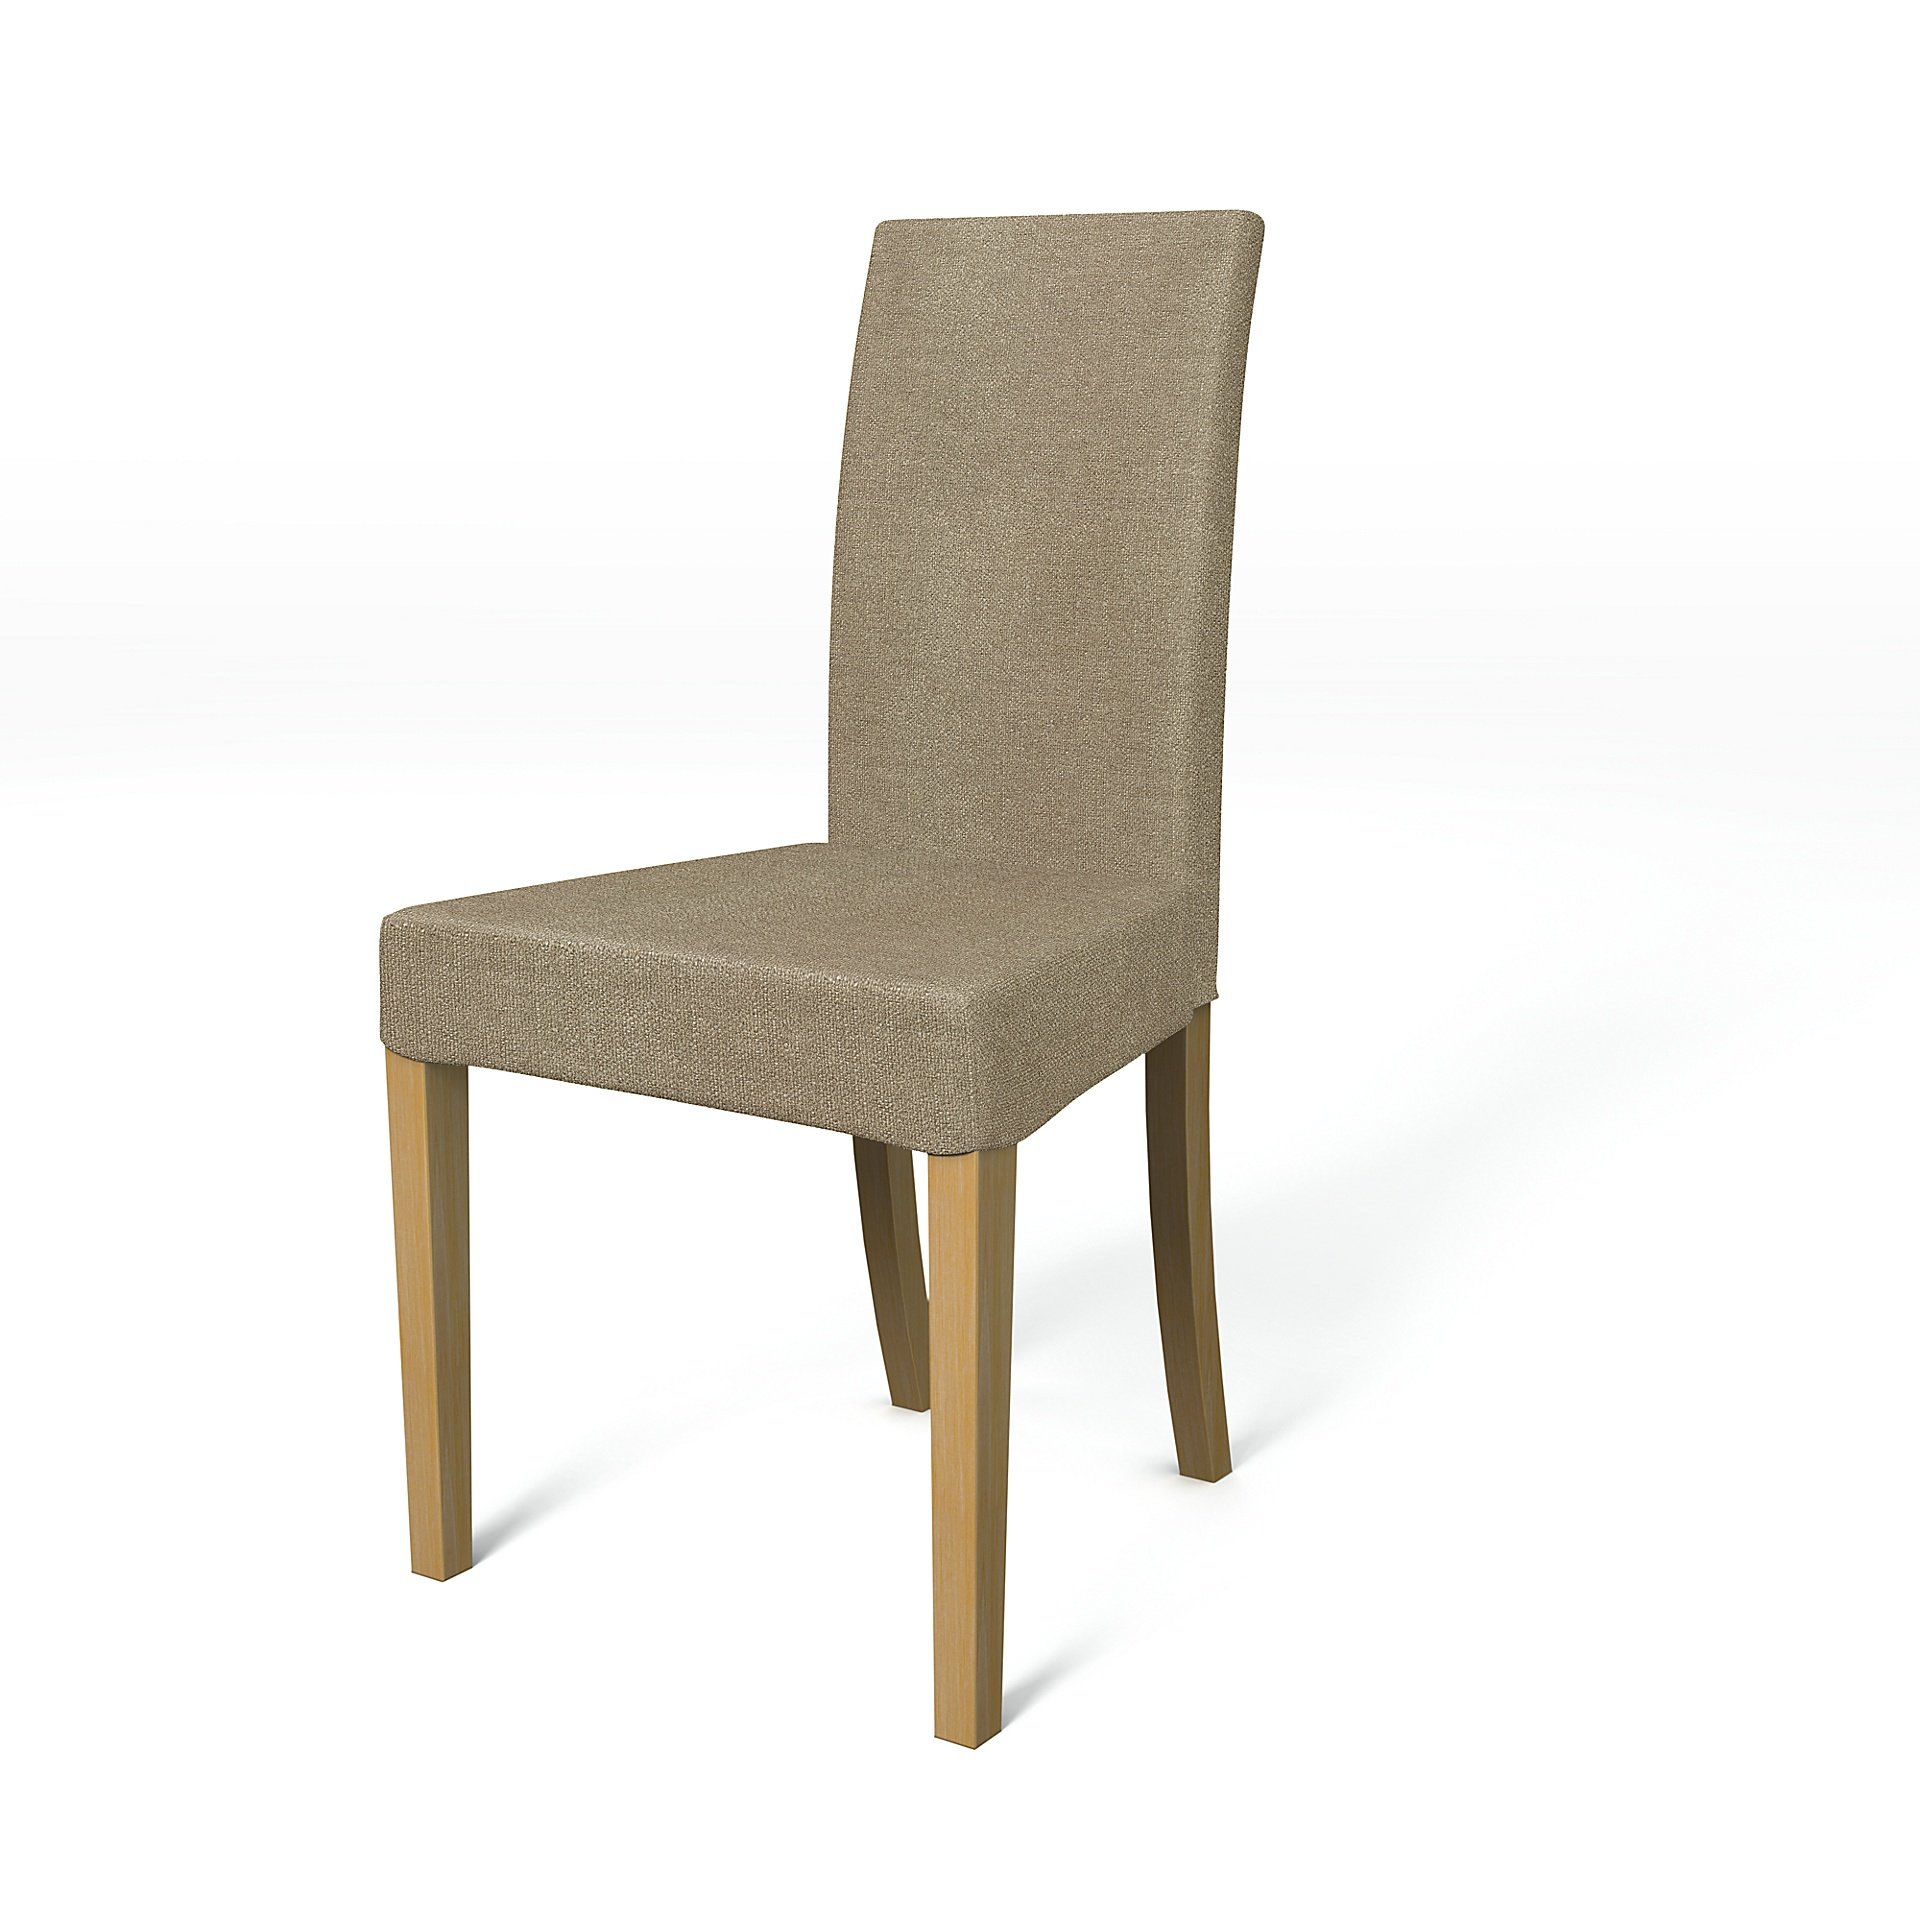 IKEA - Harry Dining Chair Cover, Pebble, Boucle & Texture - Bemz